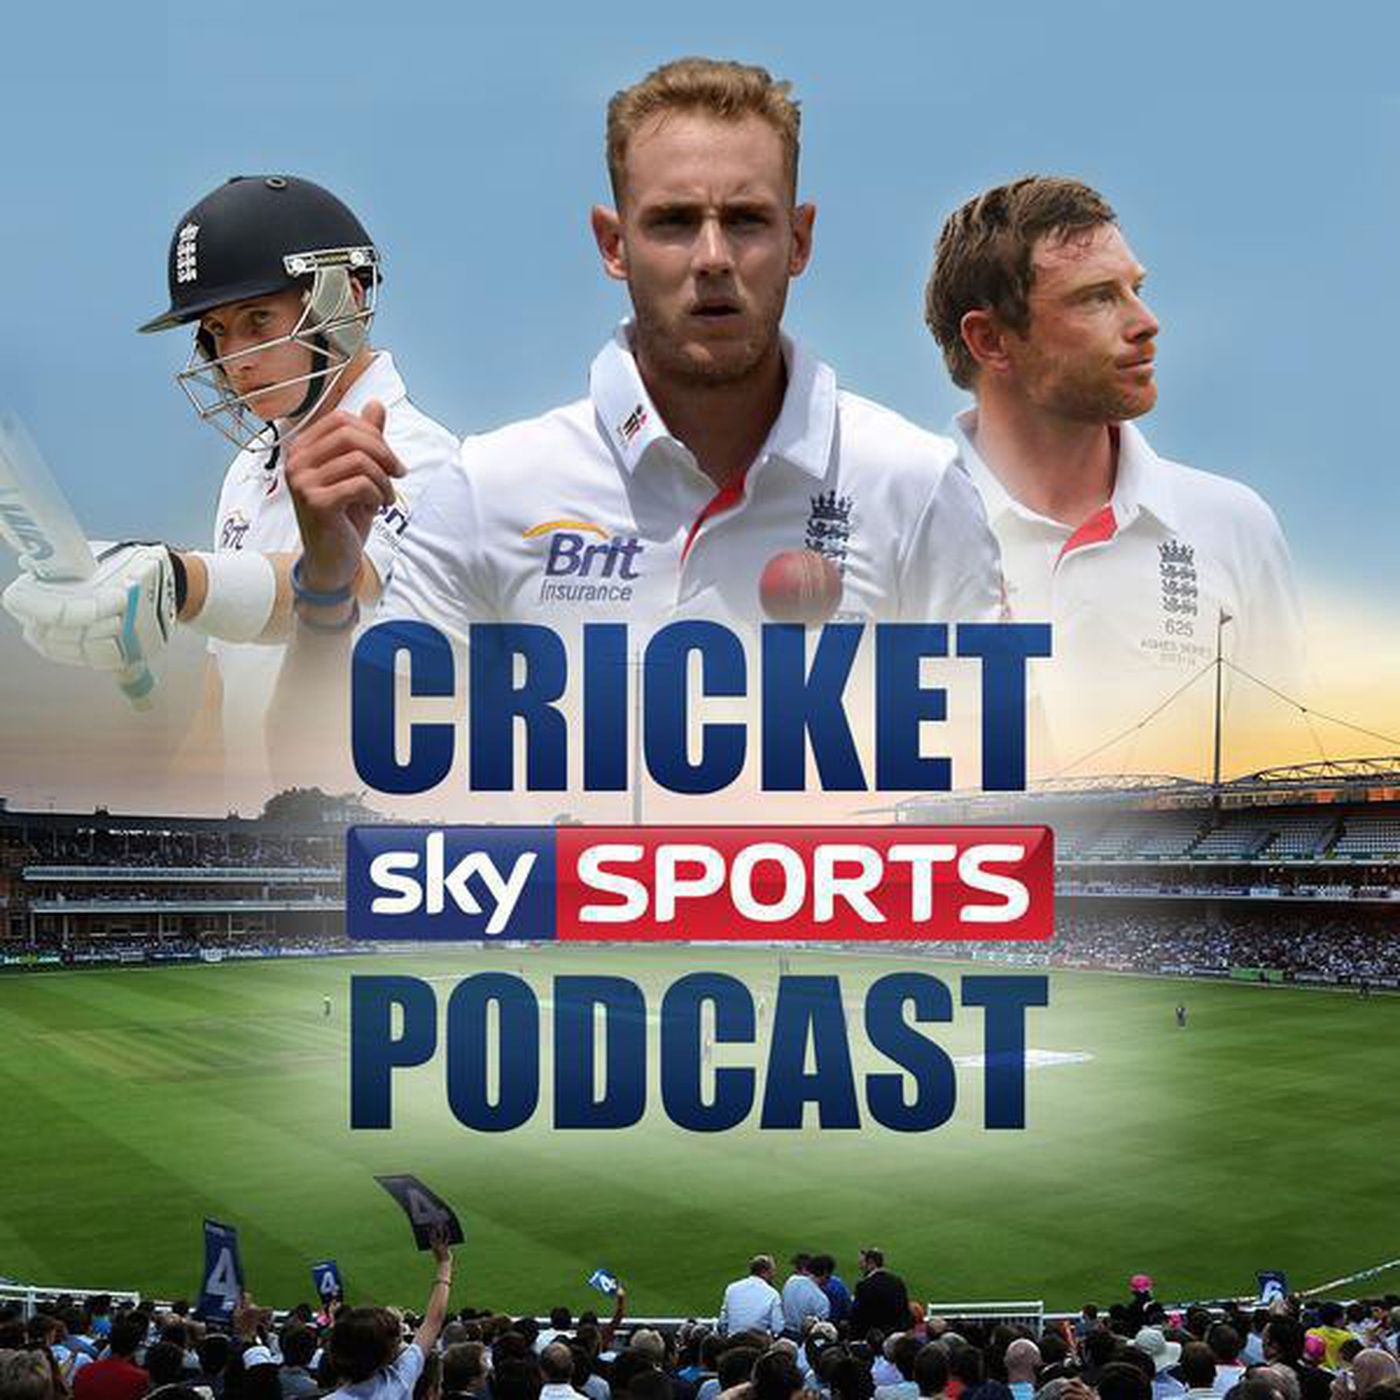 Sky Sports Cricket Podcast – 6th August